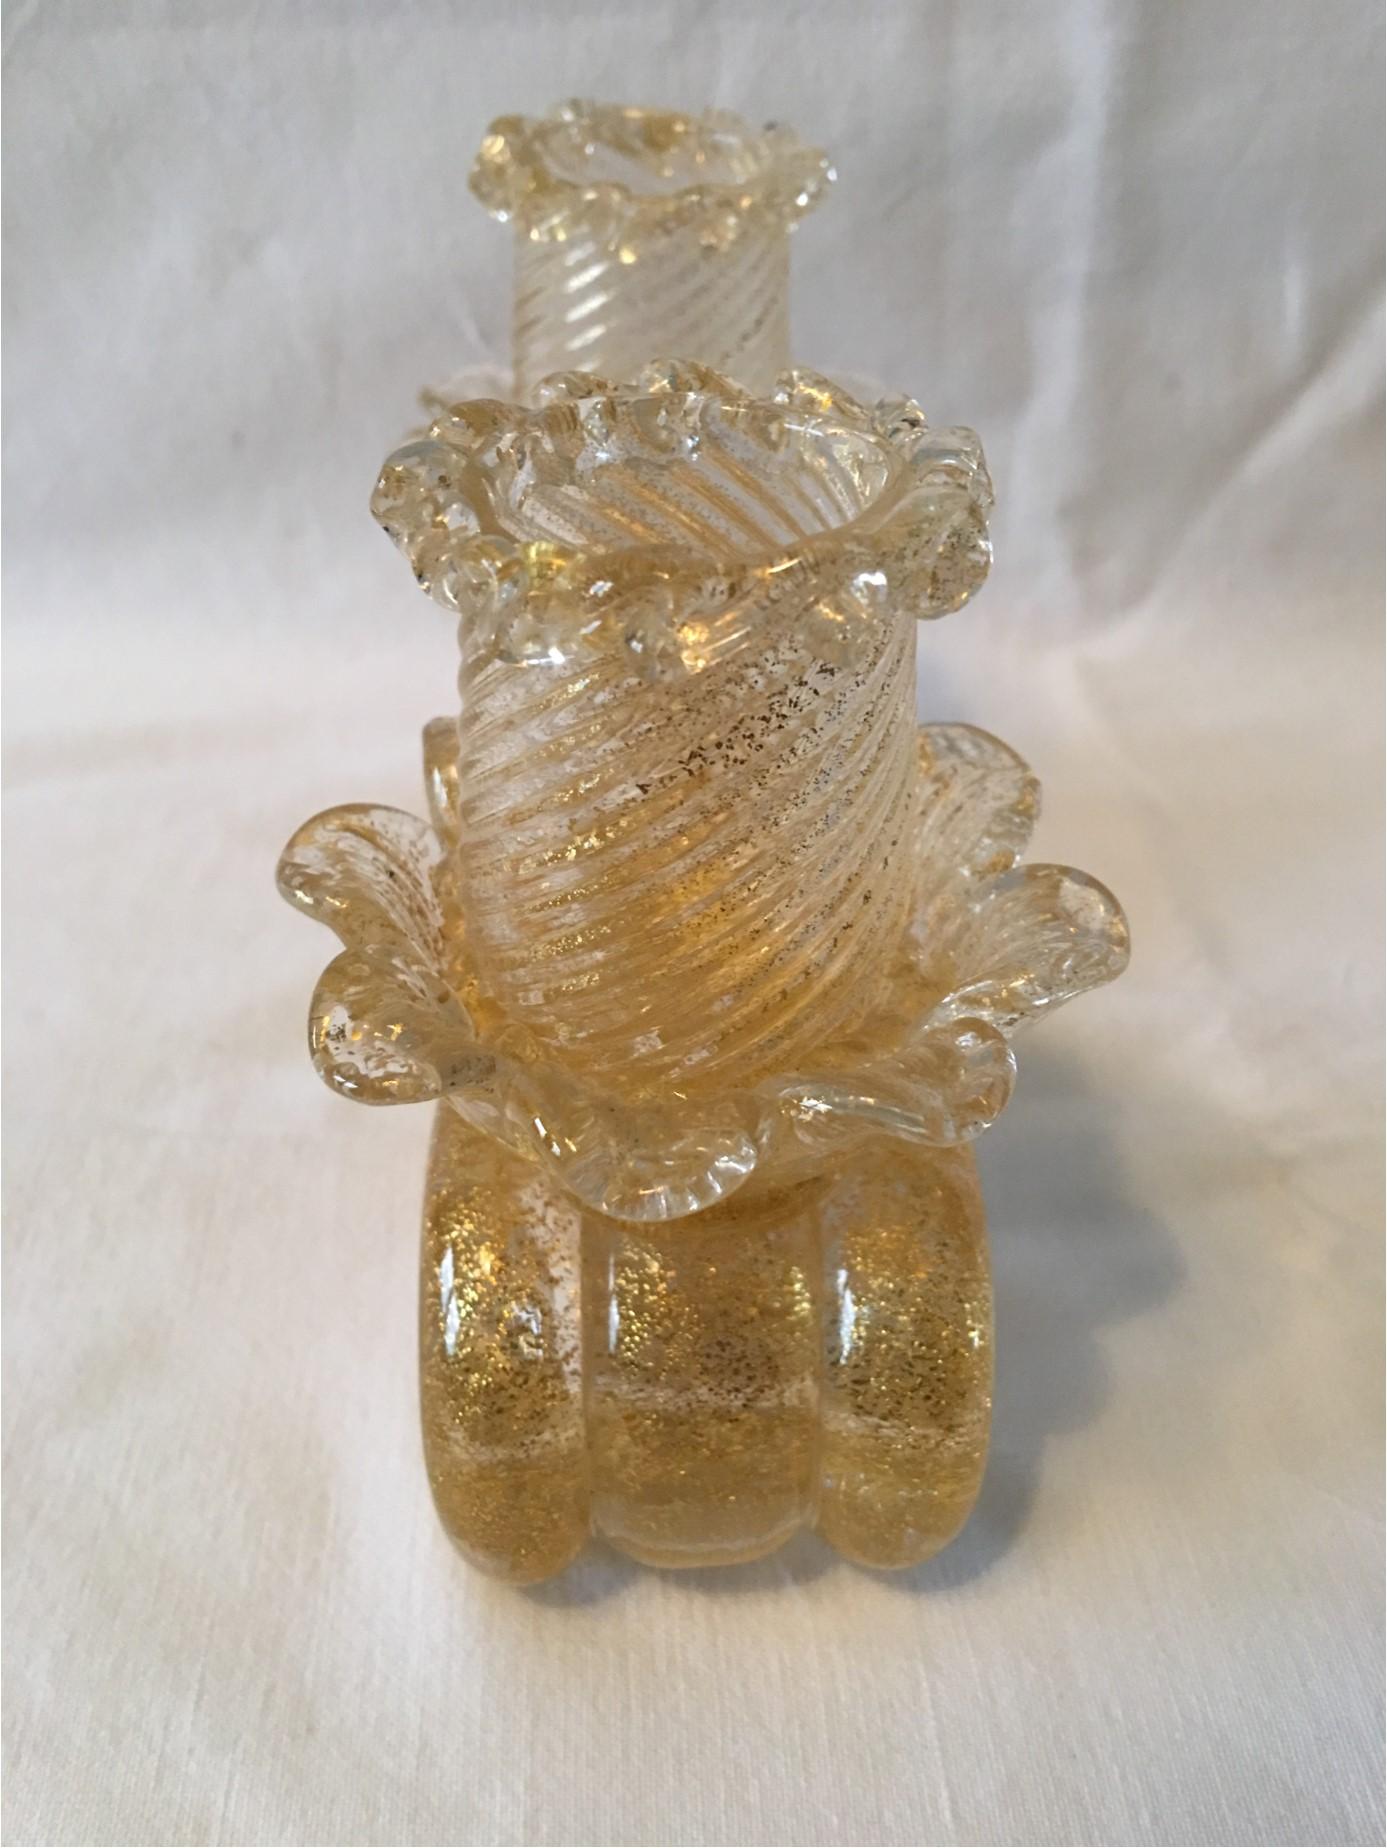 Murano Gold Flake Glass Candleholder Barovier e Toso Style, 1950s For Sale 4